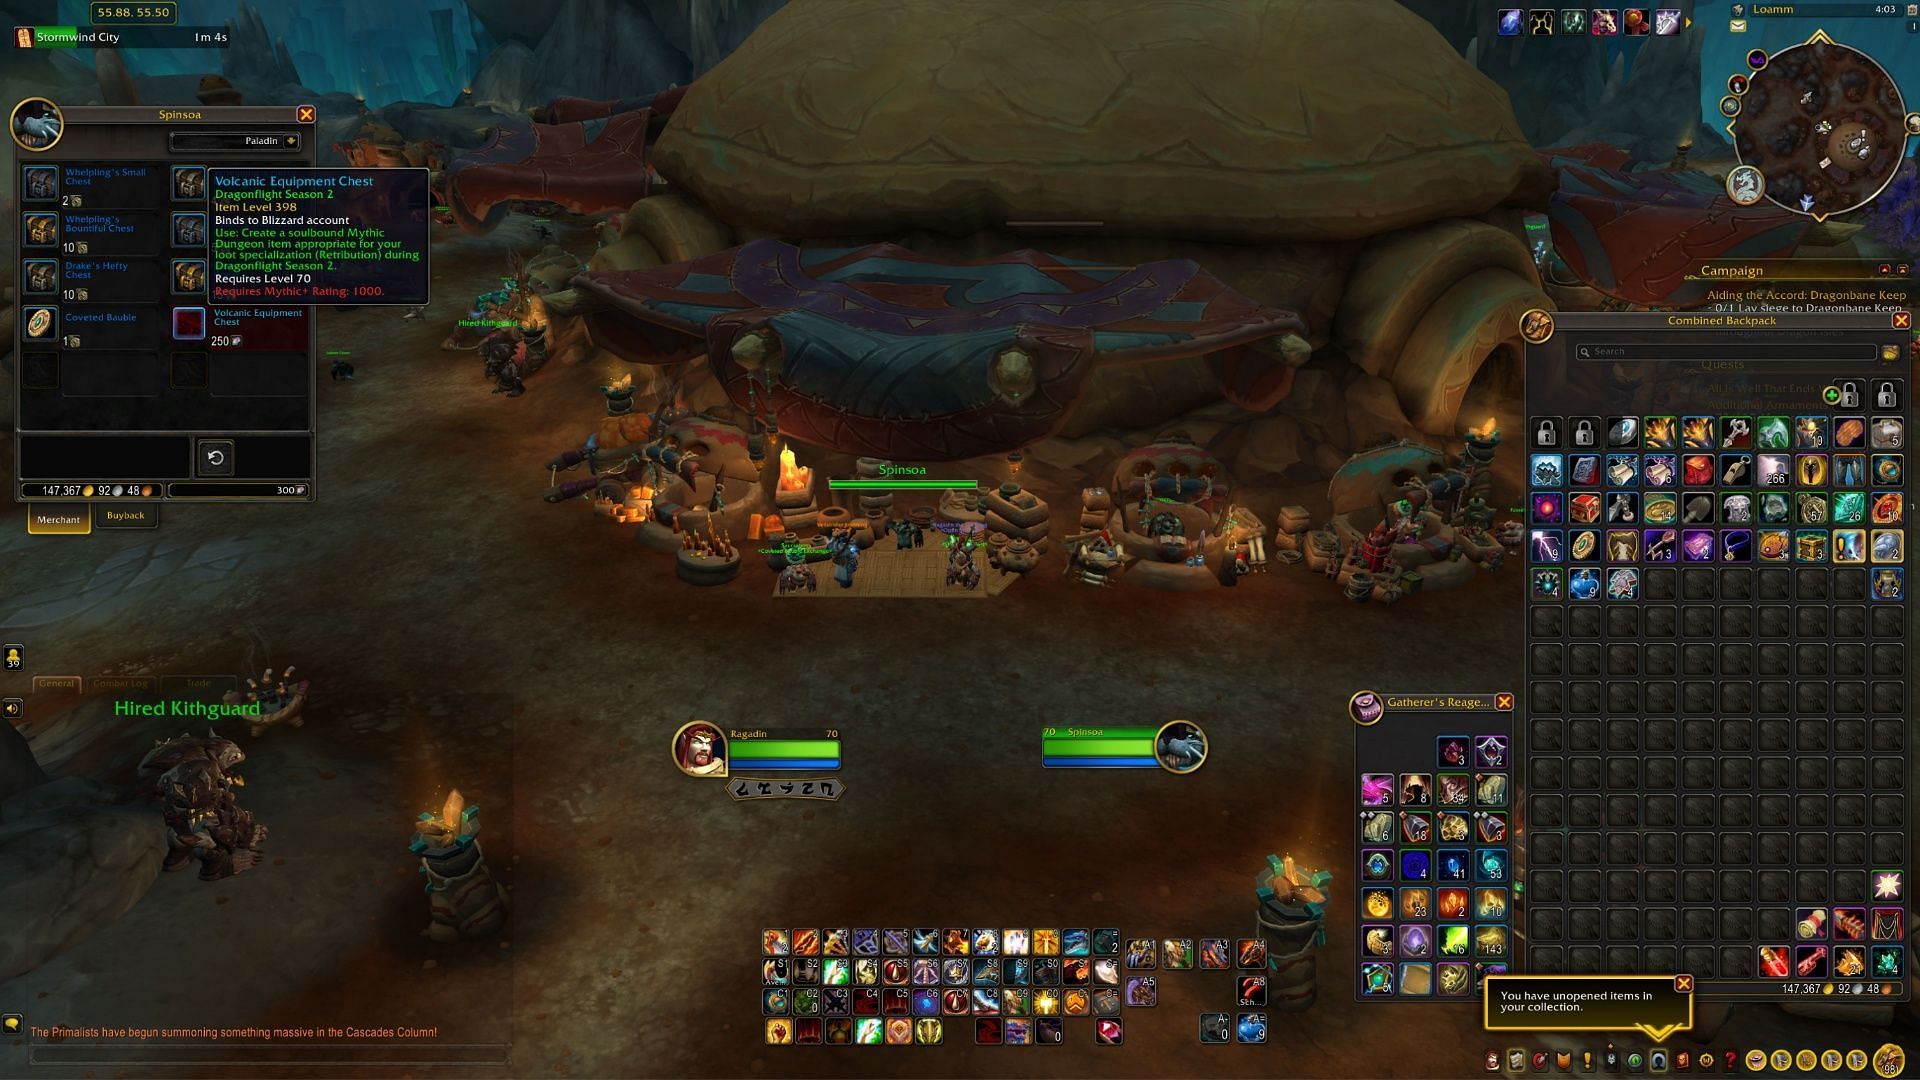 This vendor in Loamm offers the catch-up gear for Mythic+ (Image via Blizzard Entertainment)